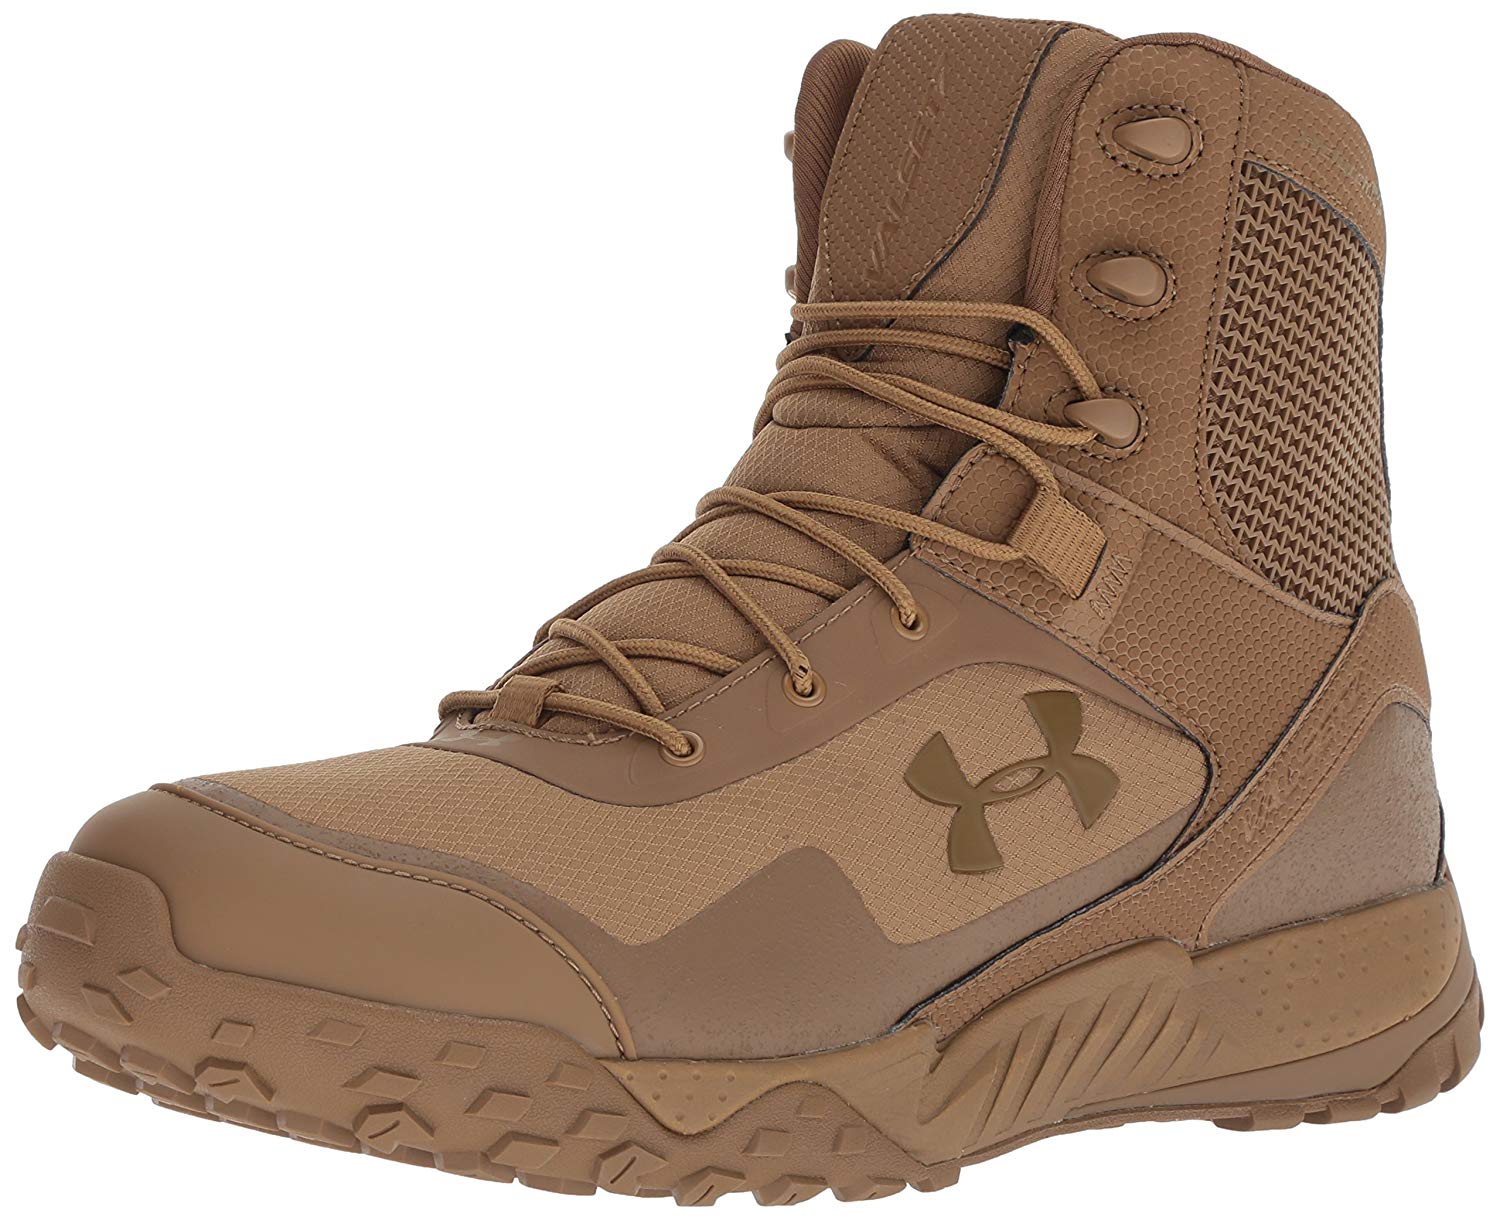 Under Armour Men's Valsetz RTS 1.5 - Wide (4E) Military and, Brown ...